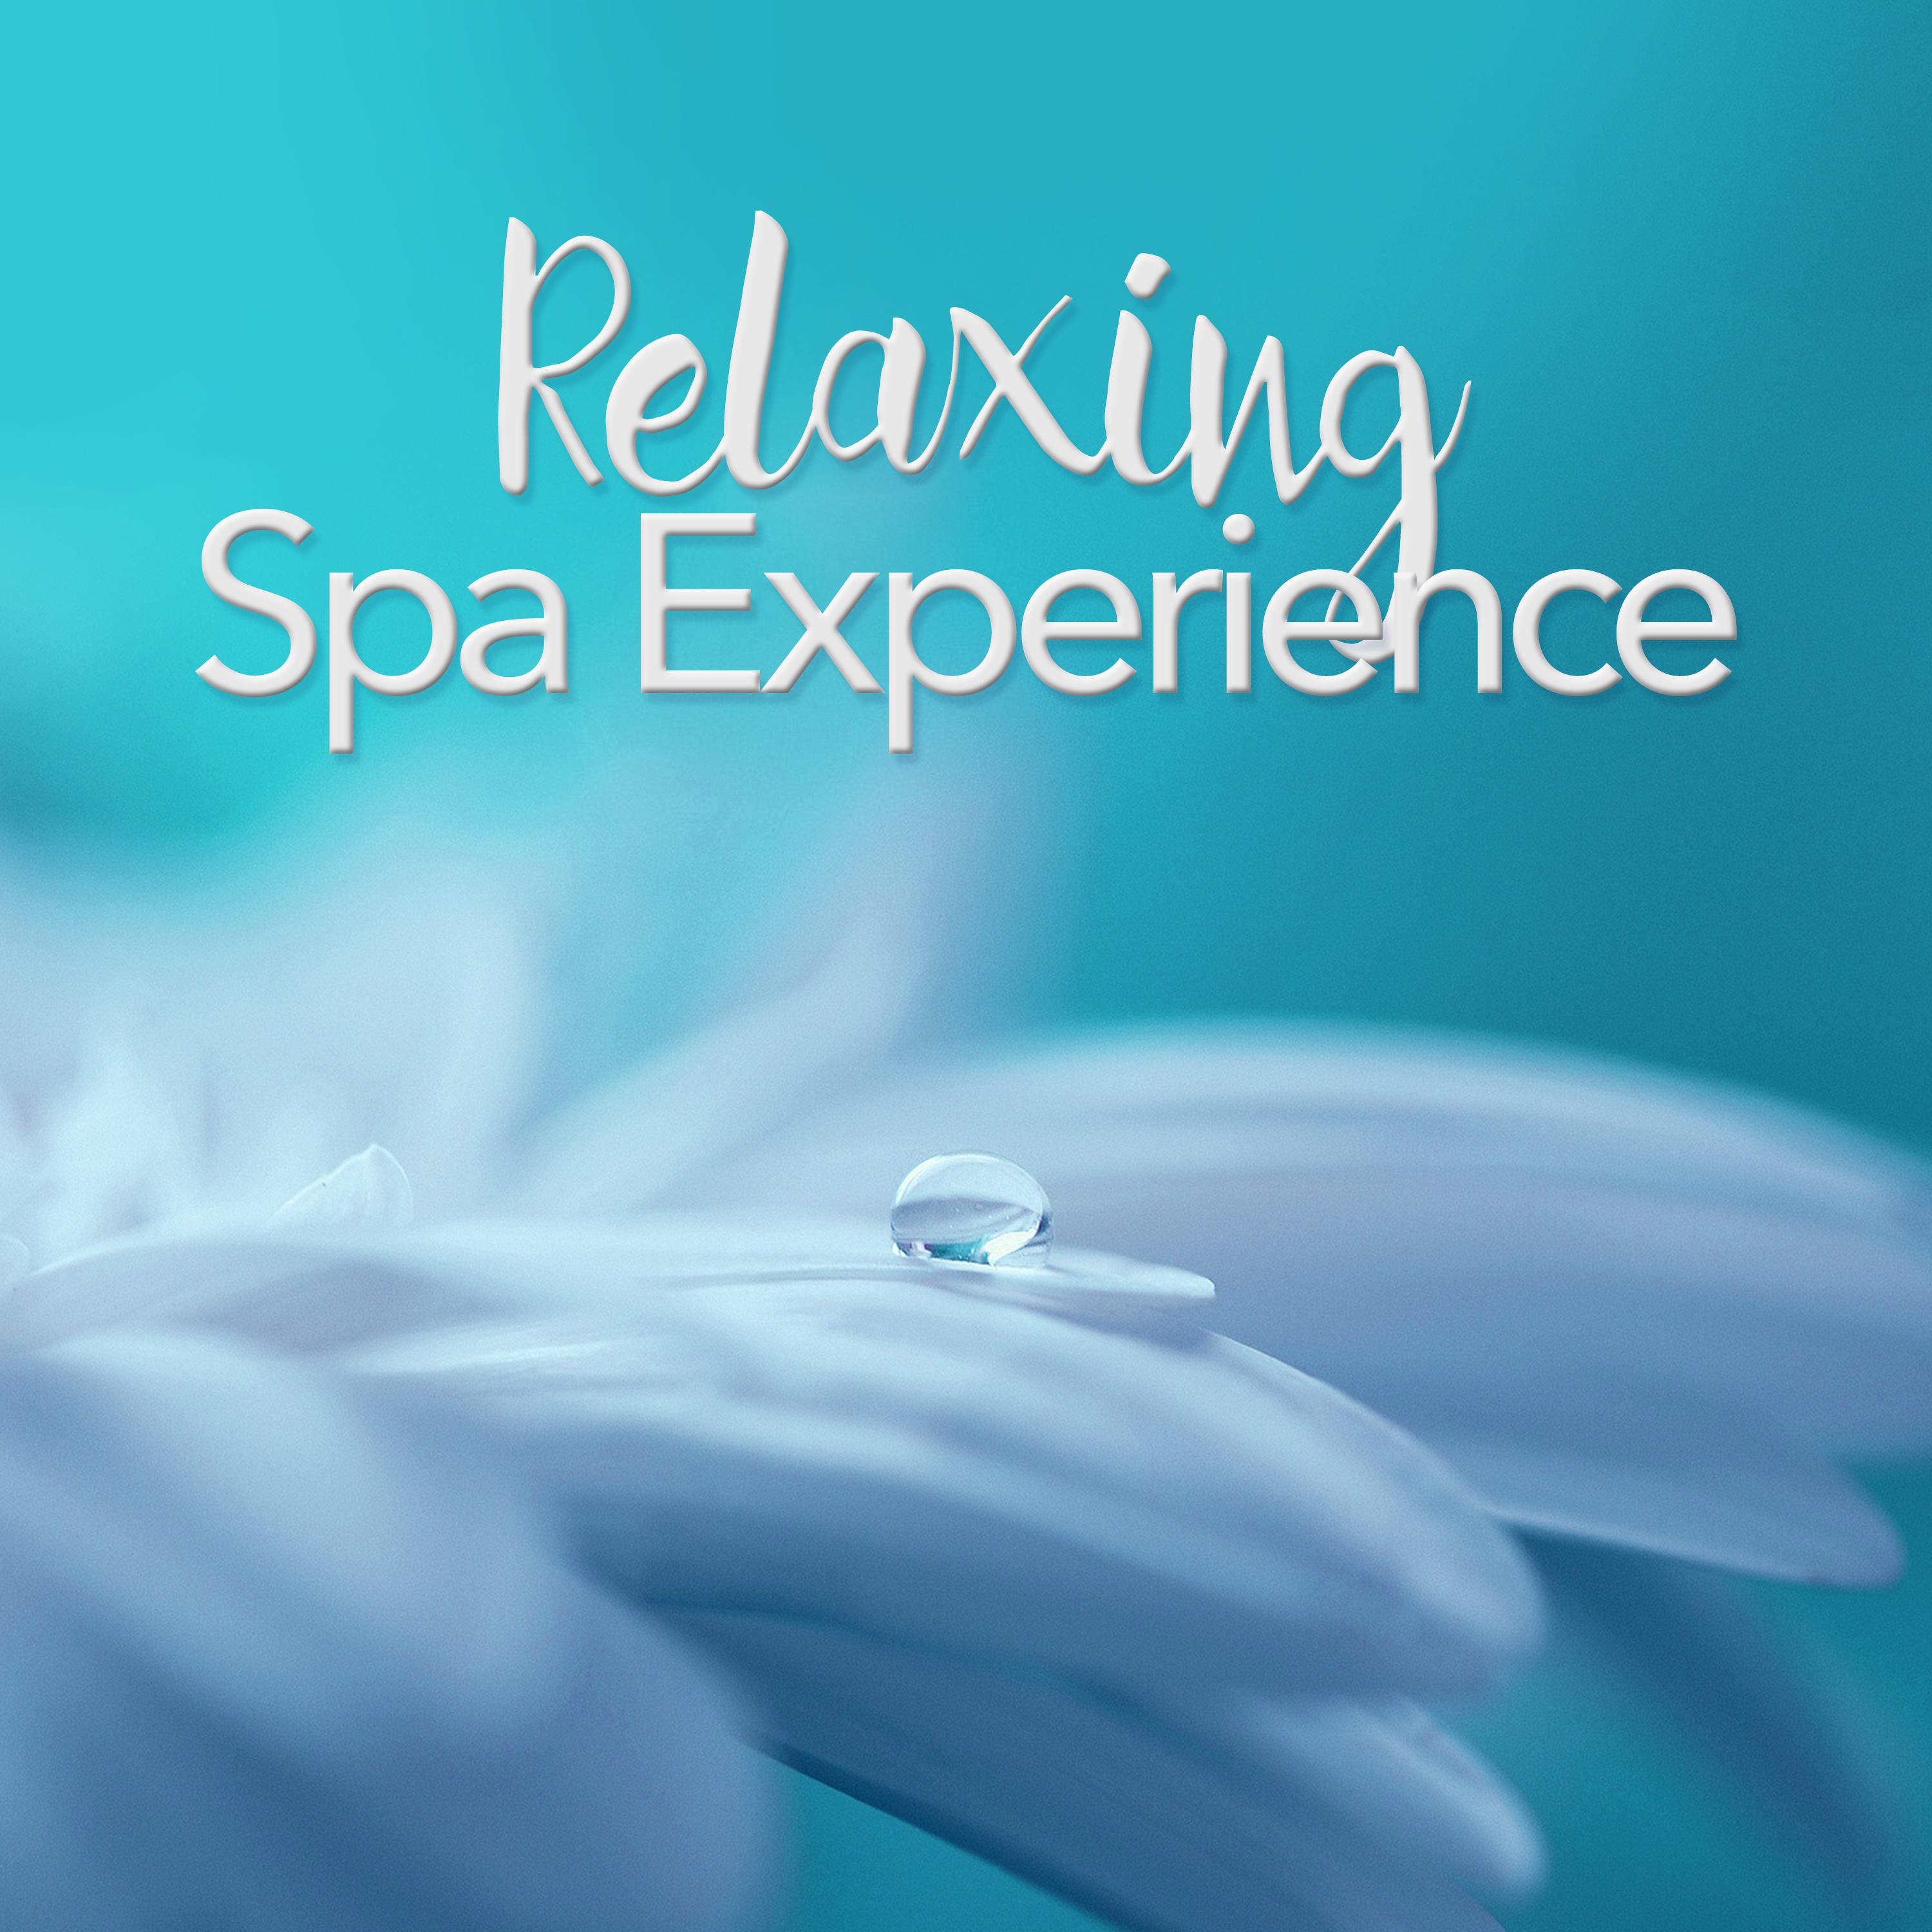 Relaxing Spa Experience